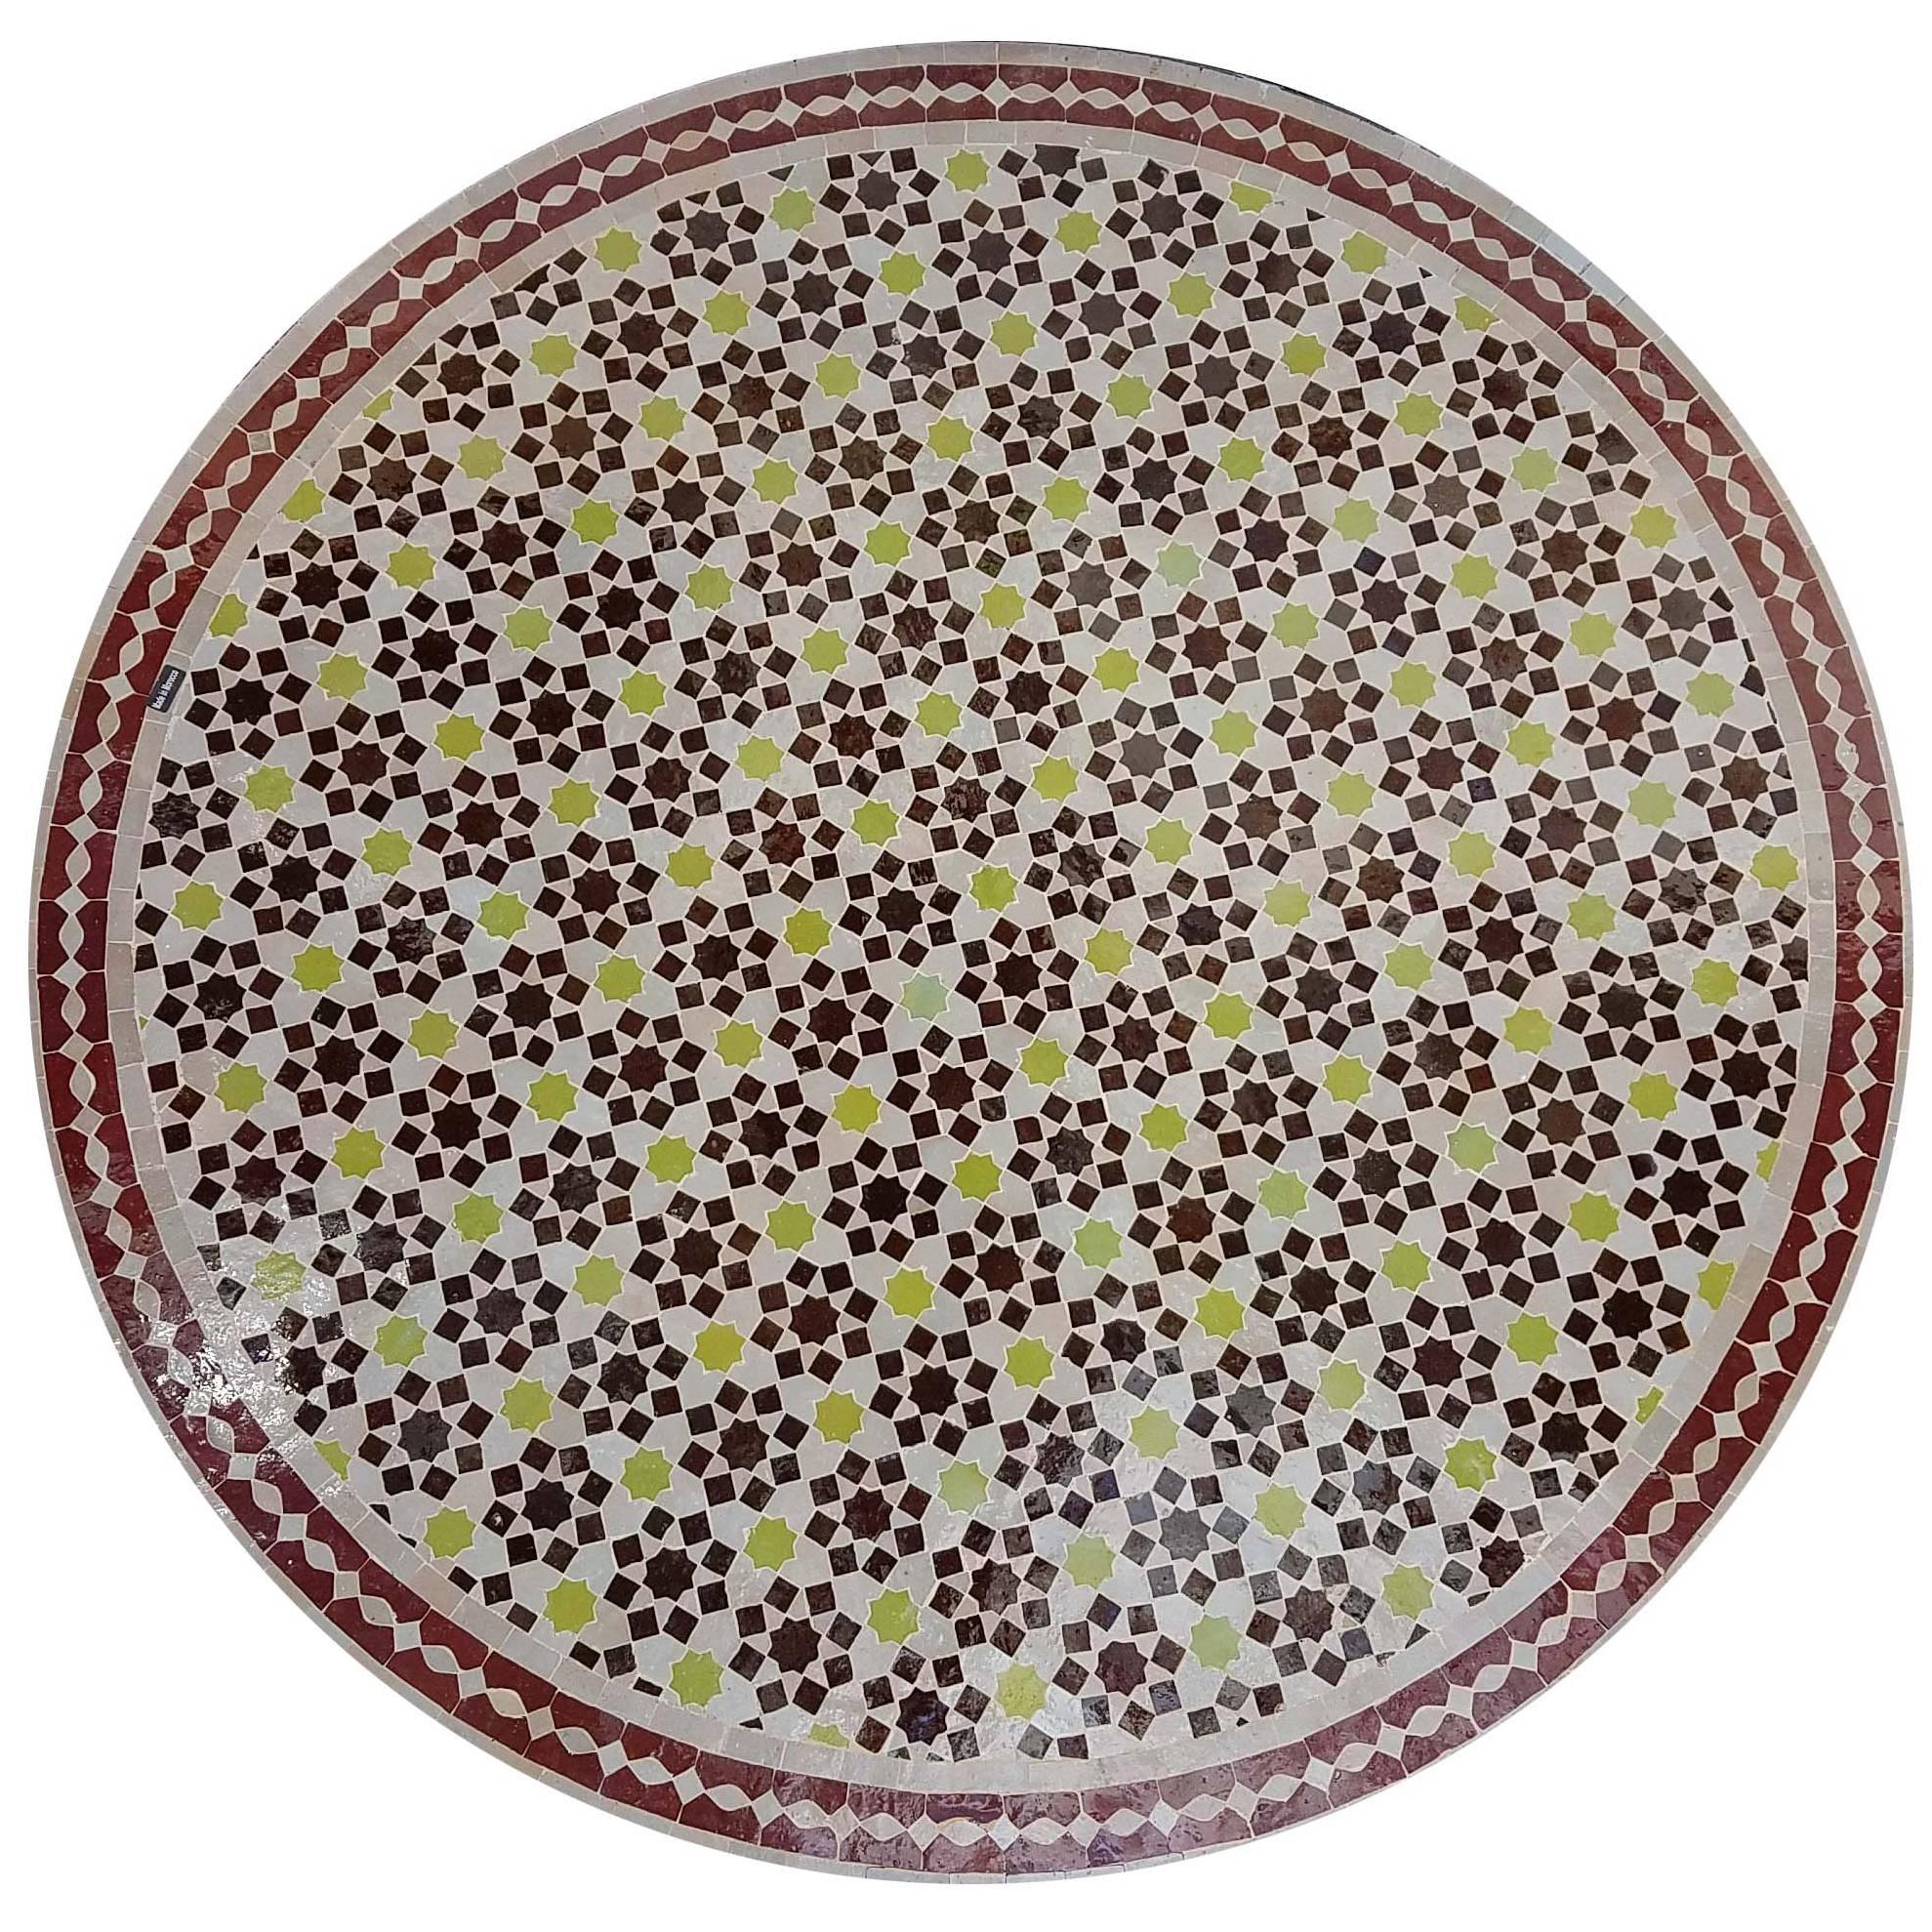 Rare design! Handmade 100% glazed Moroccan mosaic table measuring approximately 48